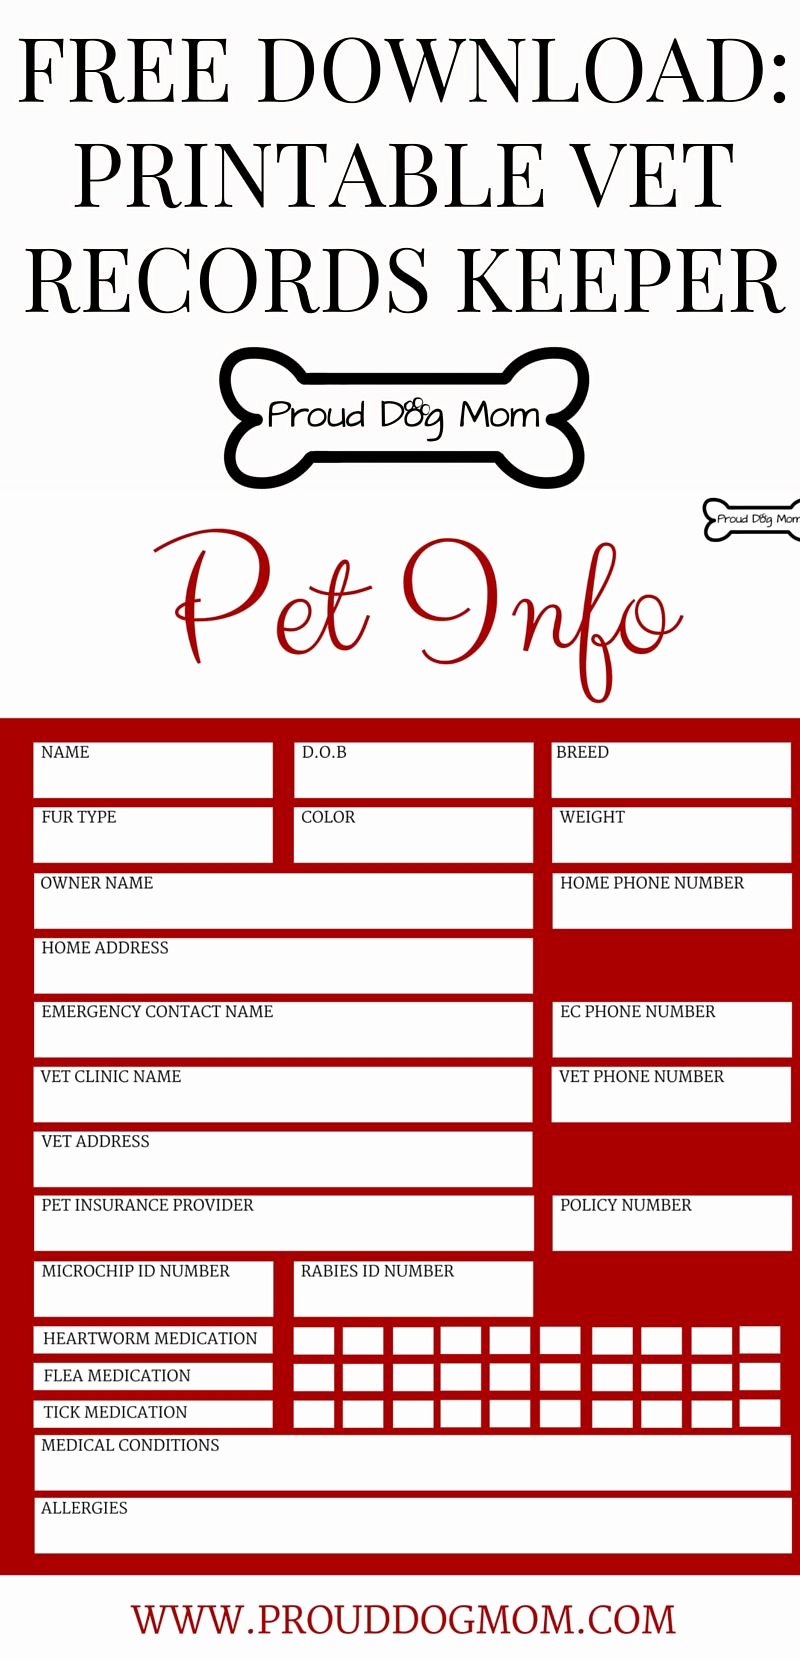 Dog Shot Record Template New Free Download Printable Vet Records Keeper